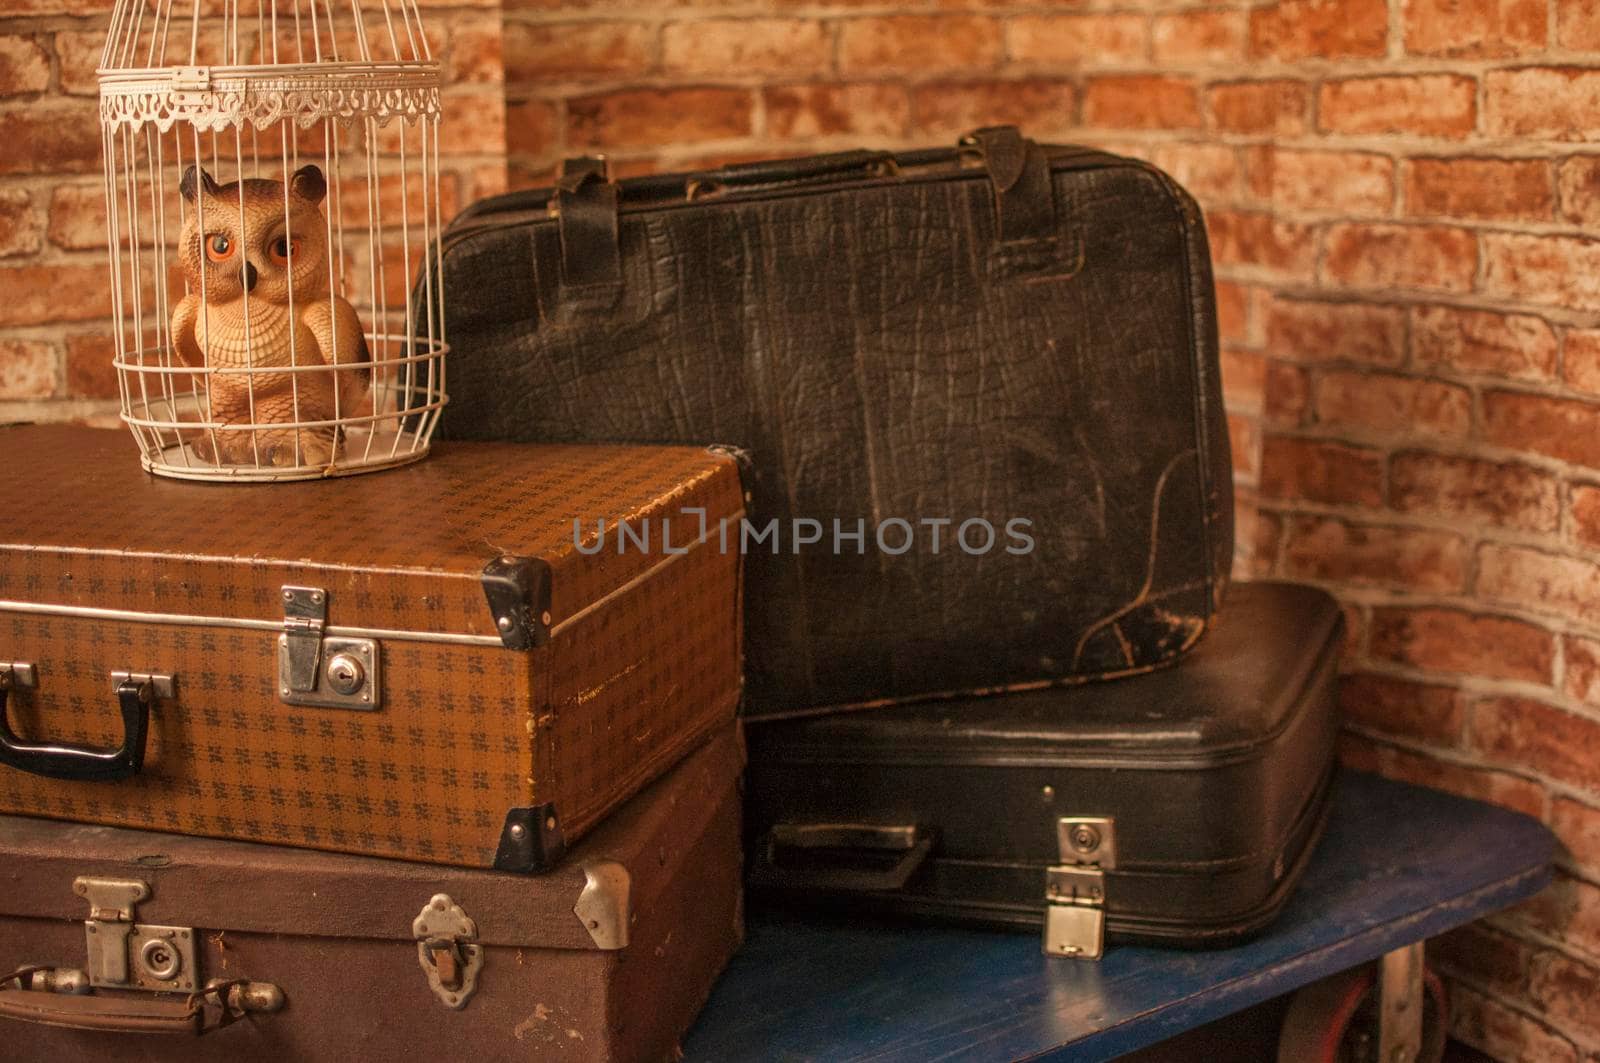 old suitcases lie on the floor on top of each other. suitcases for travel